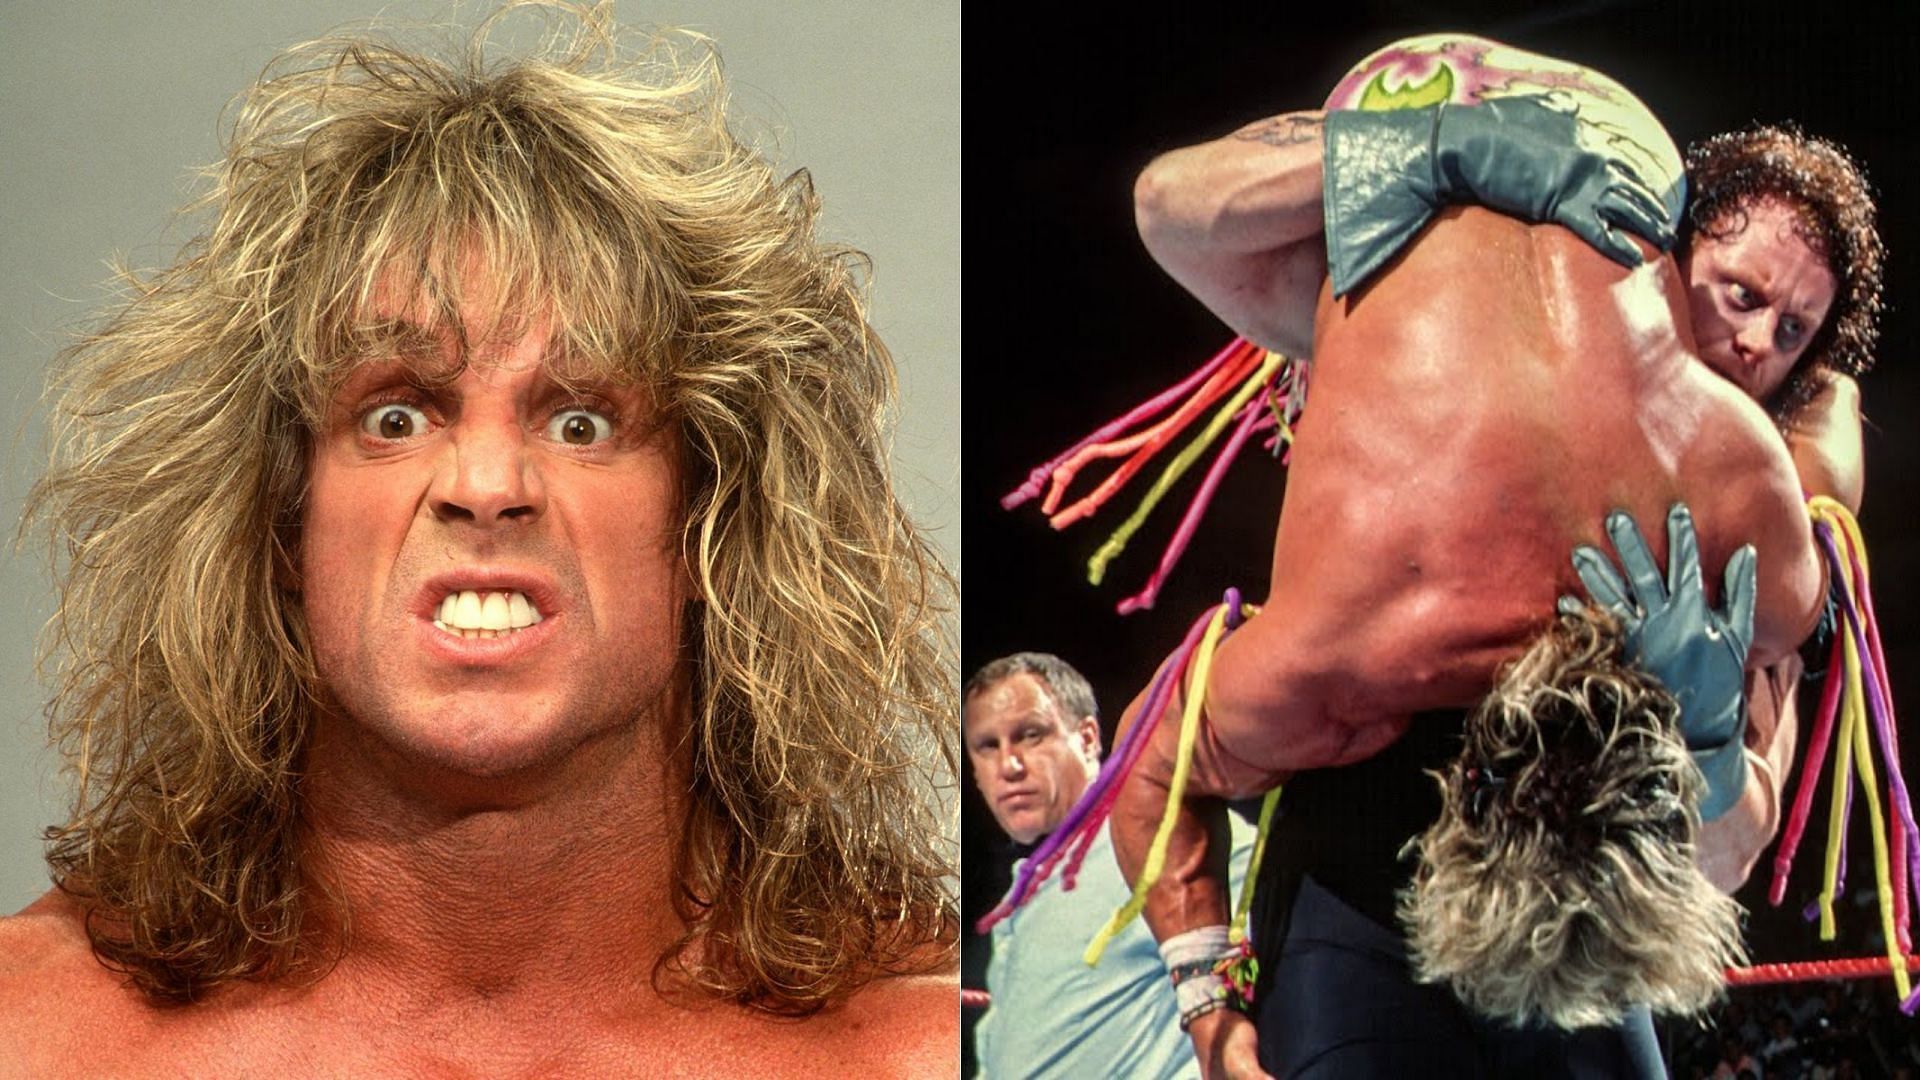 The Ultimate Warrior and The Undertaker feuded in 1991.